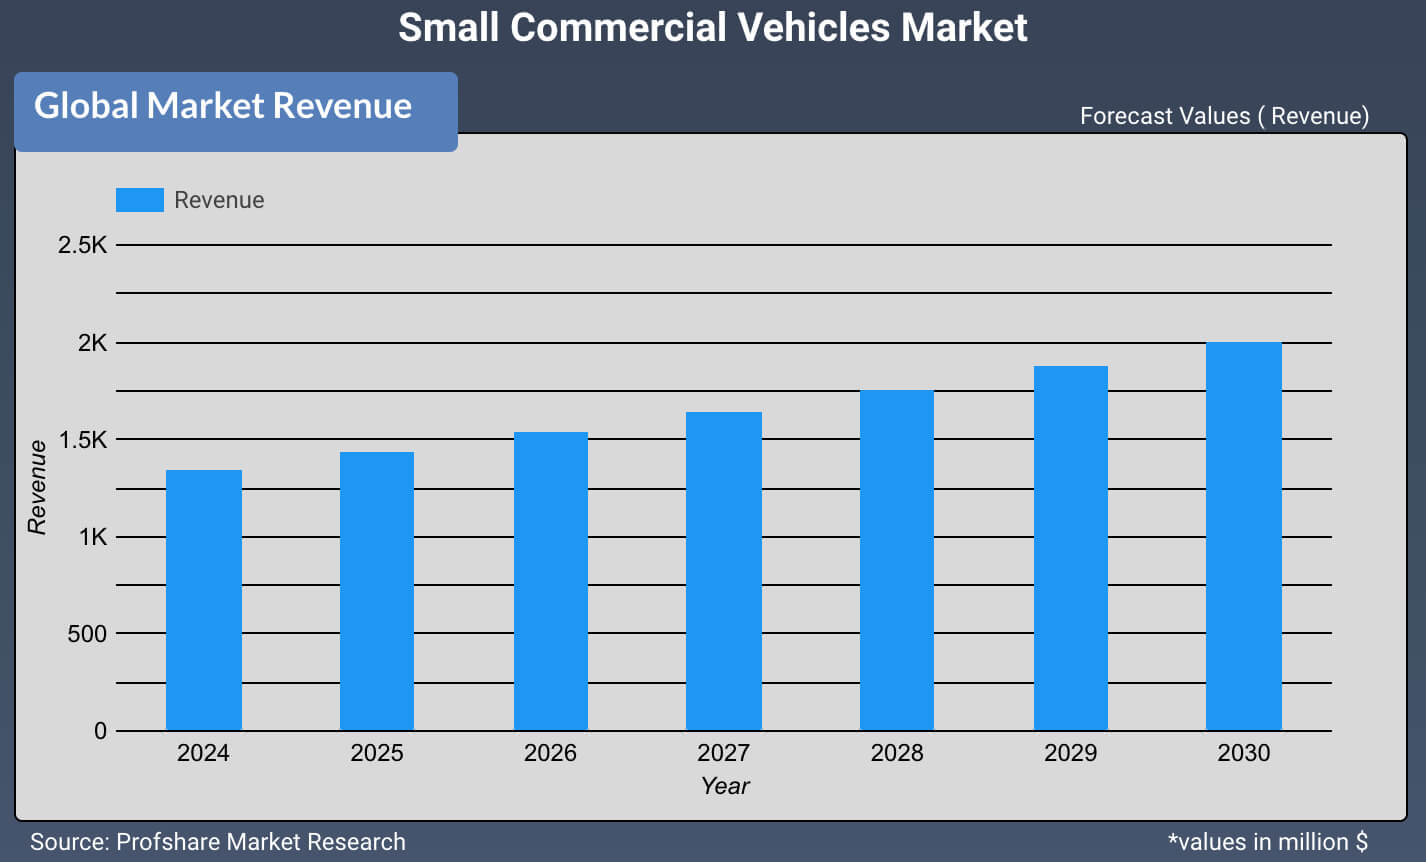 Small Commercial Vehicles Market